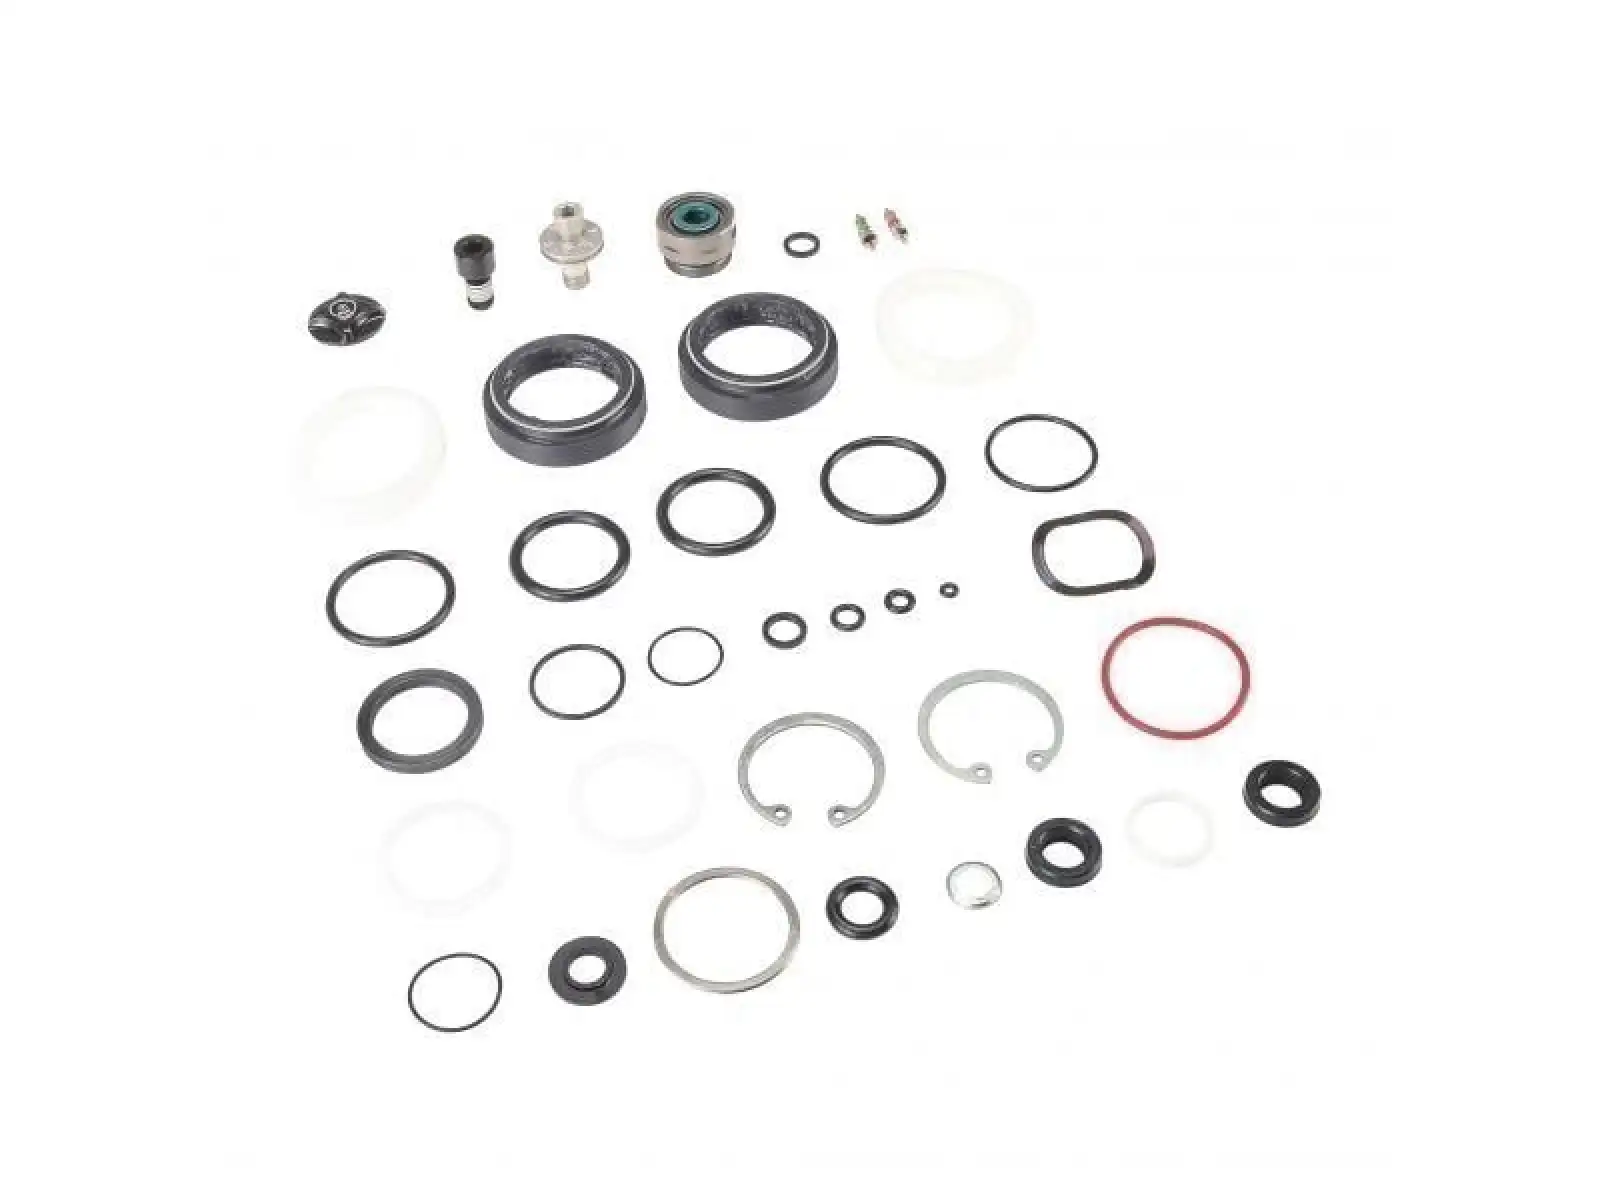 Rock Shox Service Kit Full pro vidlice Boxxer WC Charger Damper Upgrade (2015-2018)